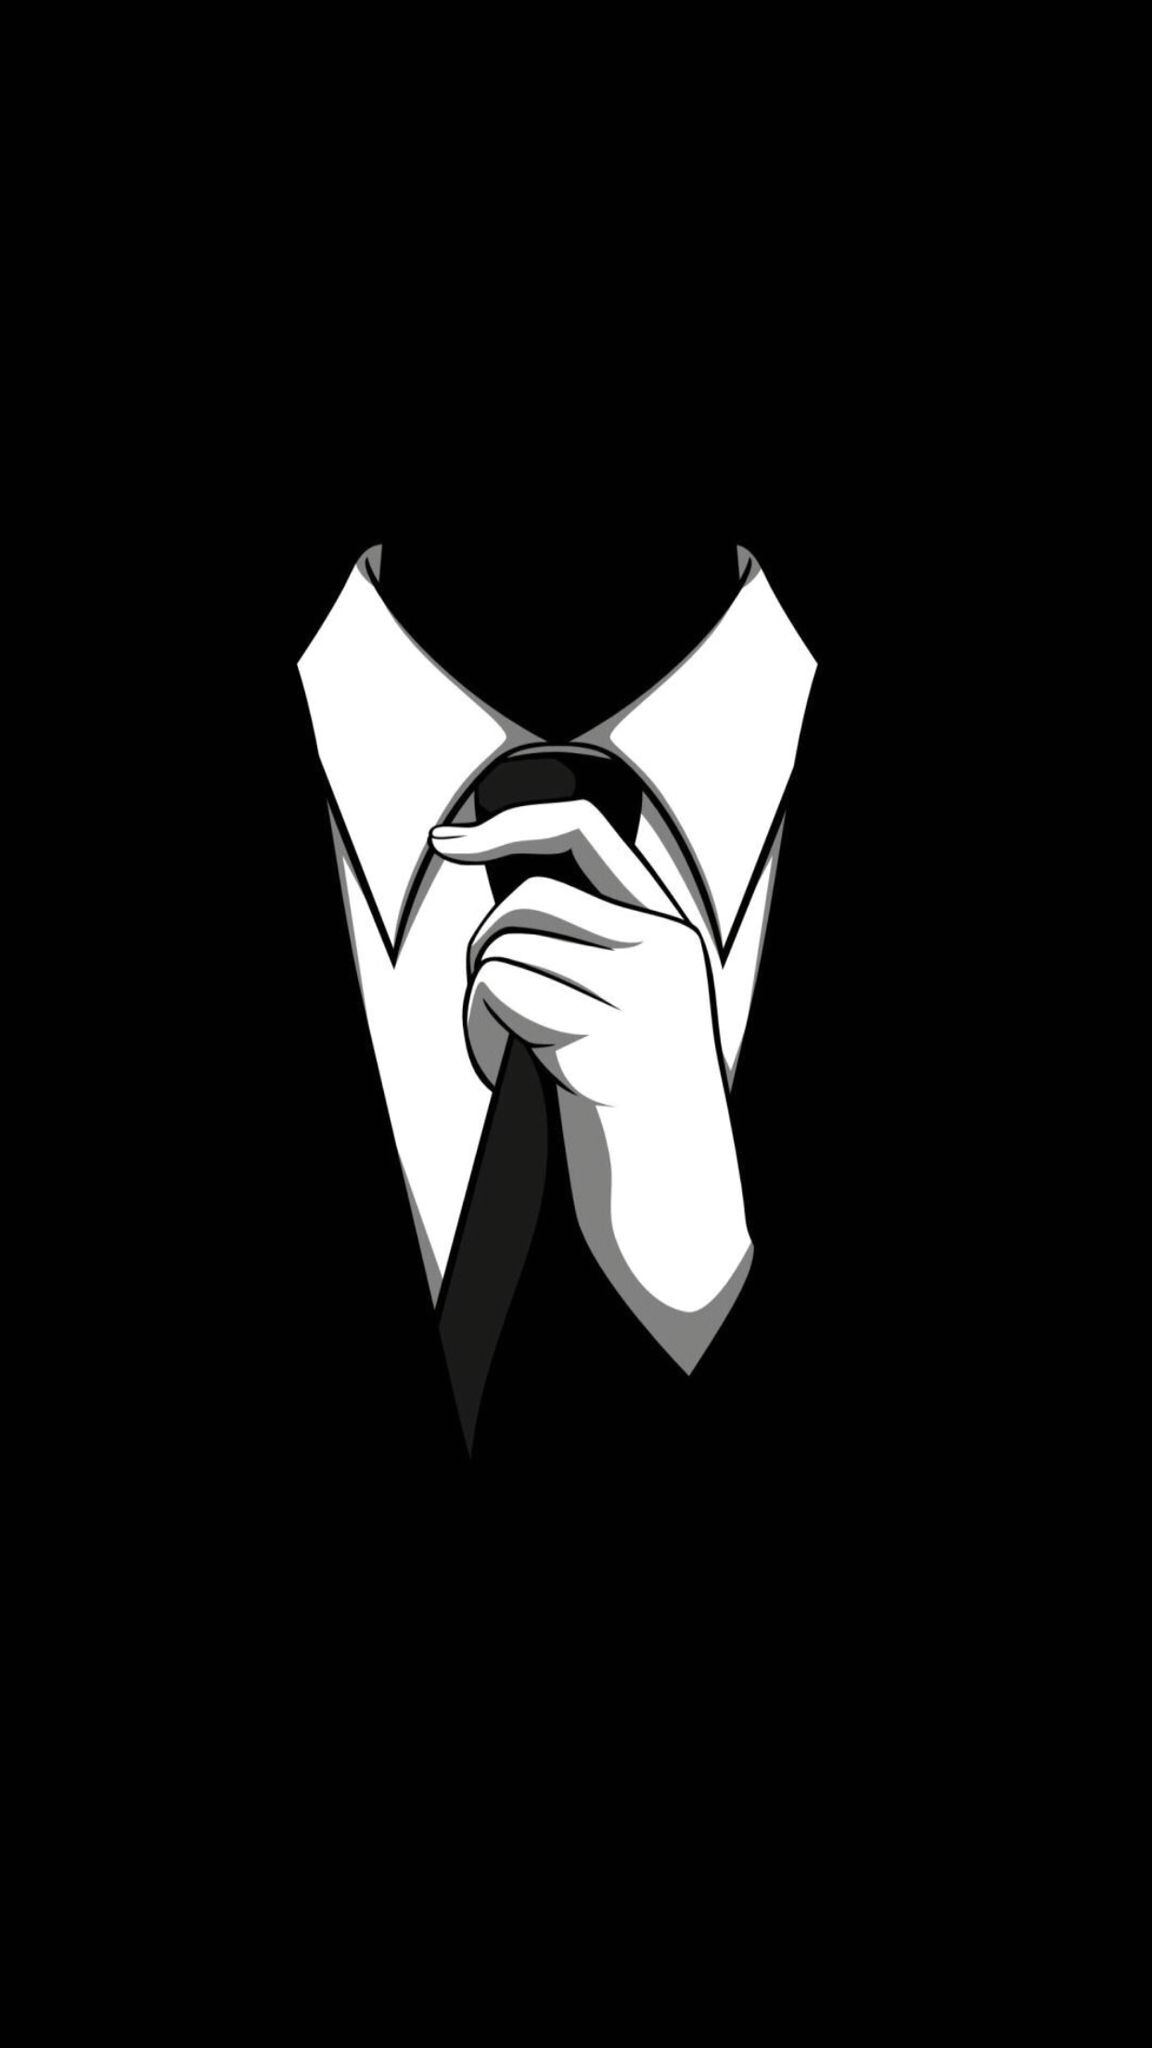 Gentleman: Classy man in the suit, A person who is polite and educated and can be trusted. 1160x2050 HD Wallpaper.